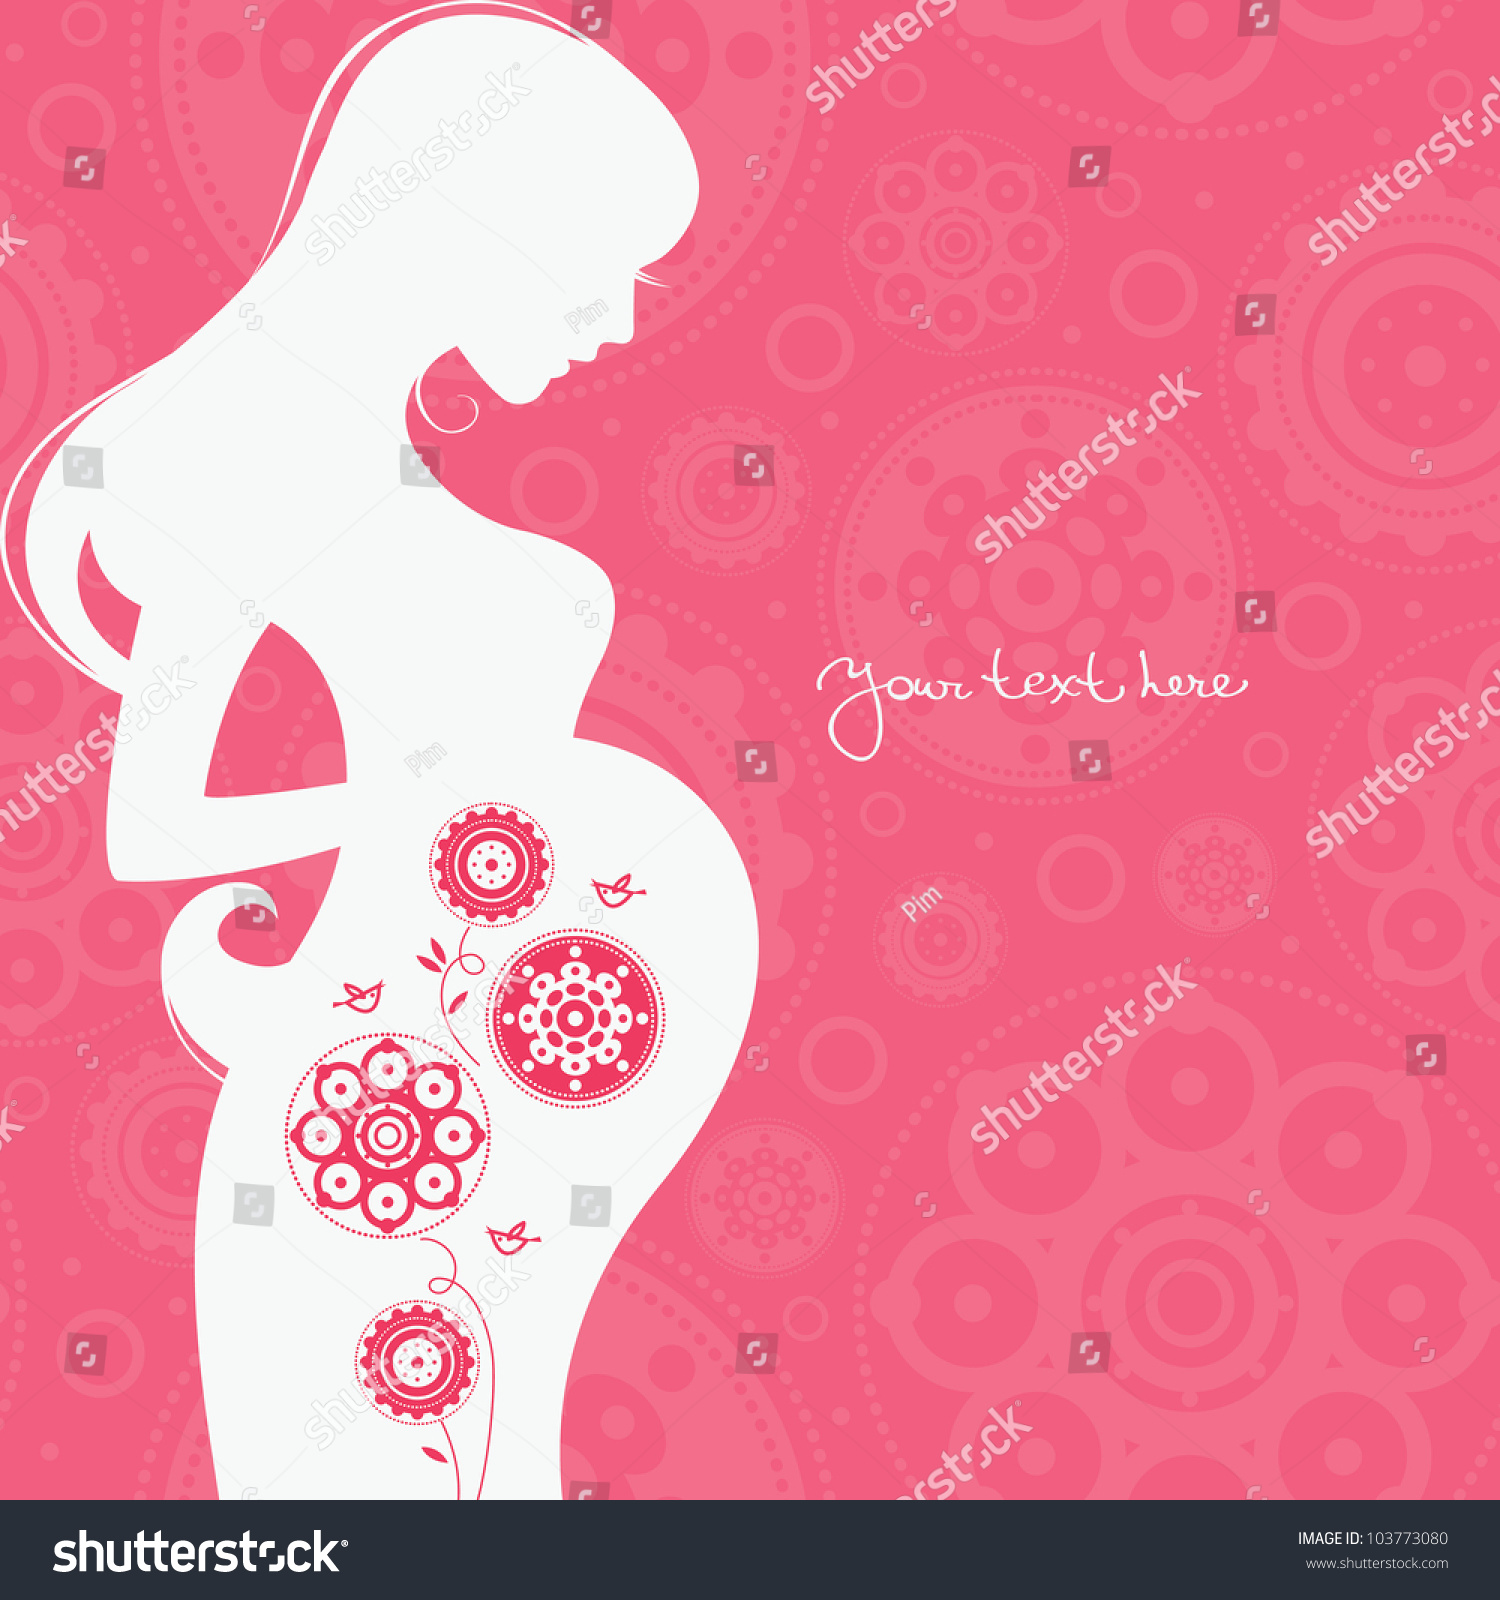 http://image.shutterstock.com/z/stock-vector-background-with-silhouette-of-pregnant-woman-103773080.jpg